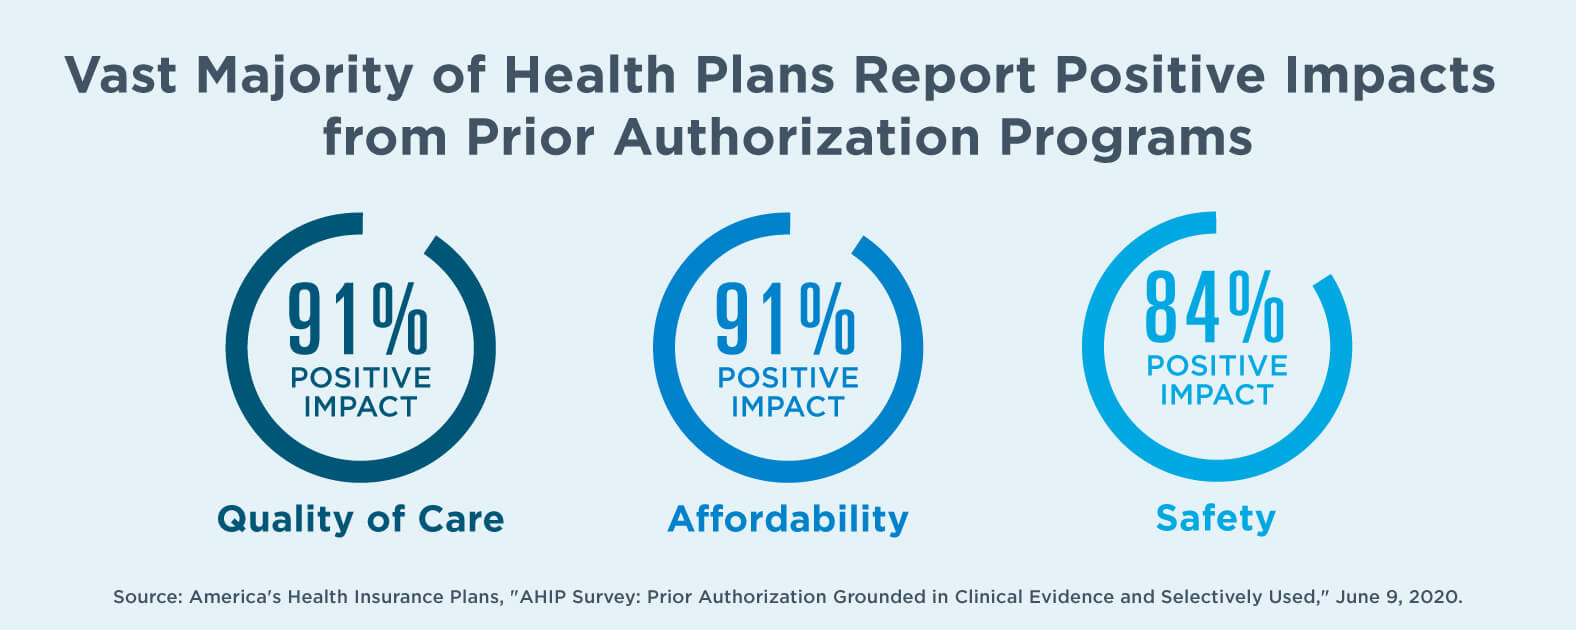 Vast Majority of Health Plans Report Positive Impacts from Prior Authorization Impacts